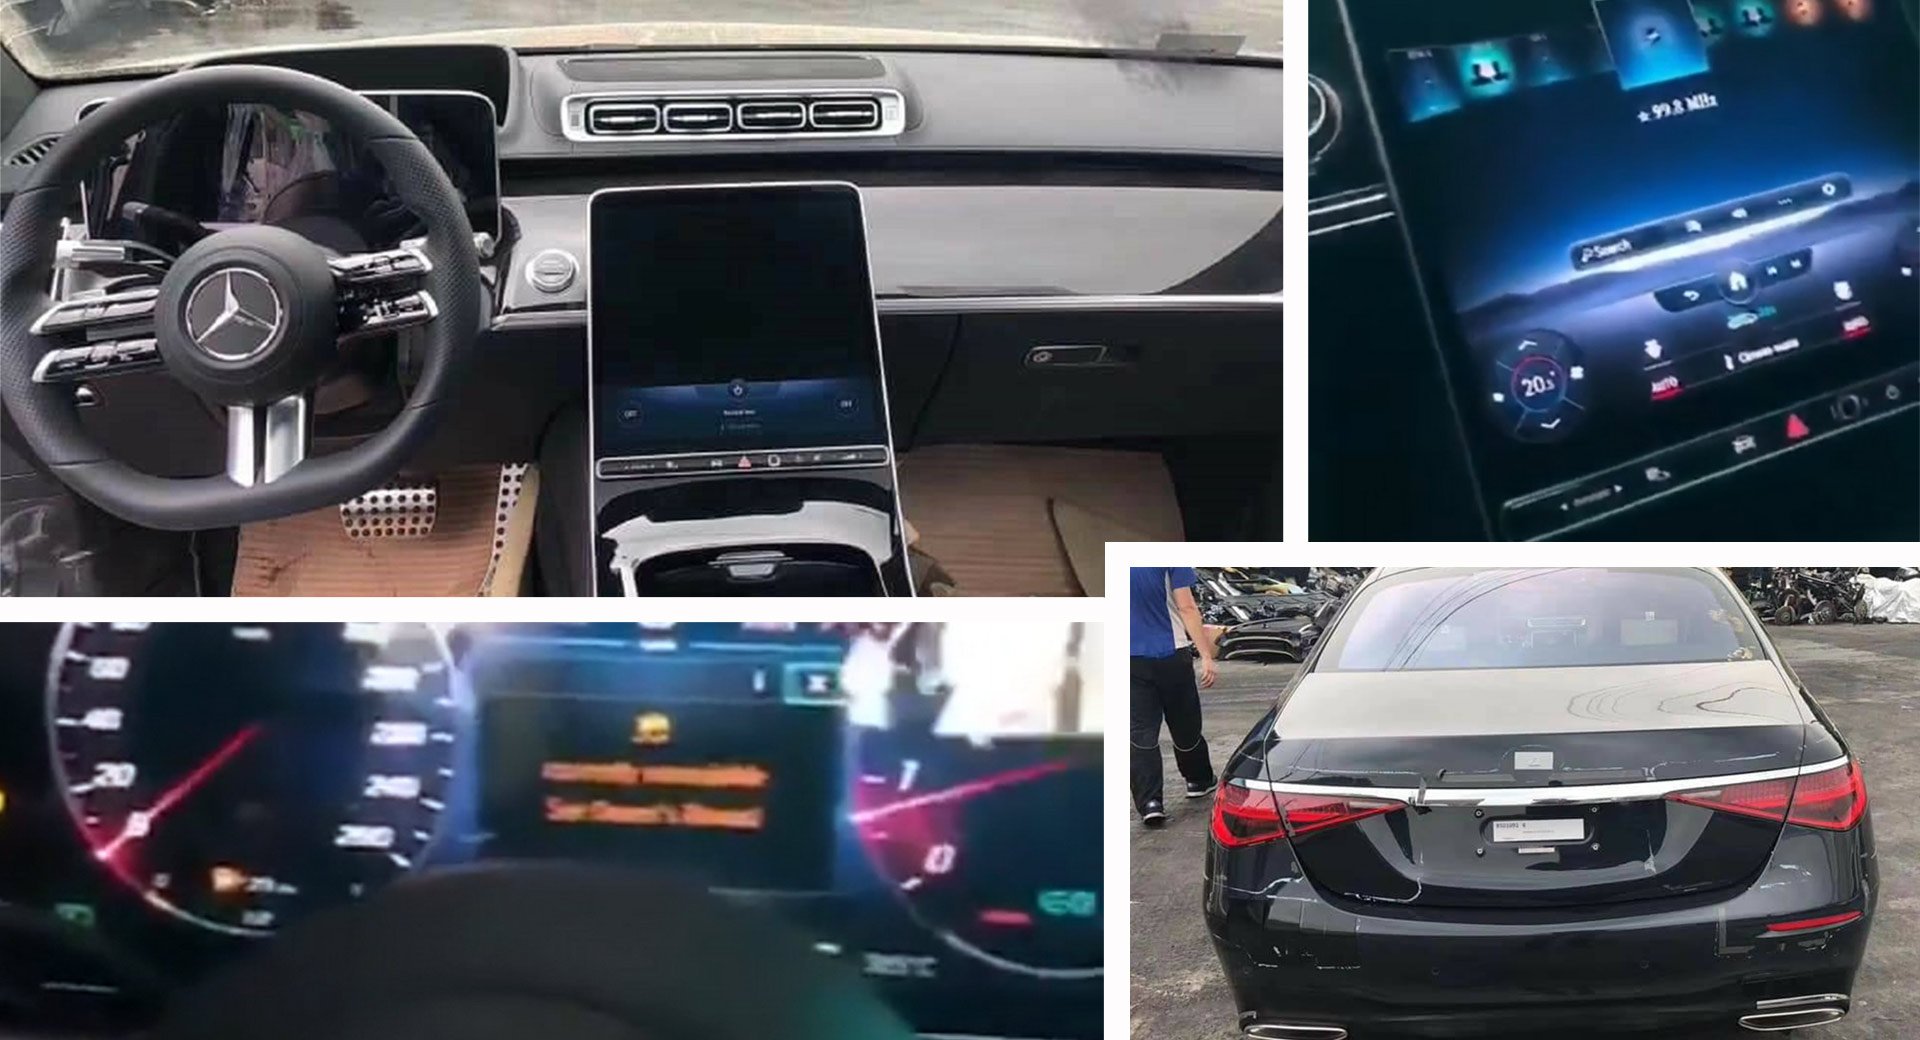 21 Mercedes Benz S Class Reveals Interior And Exterior In New Leaked Photos Video Carscoops